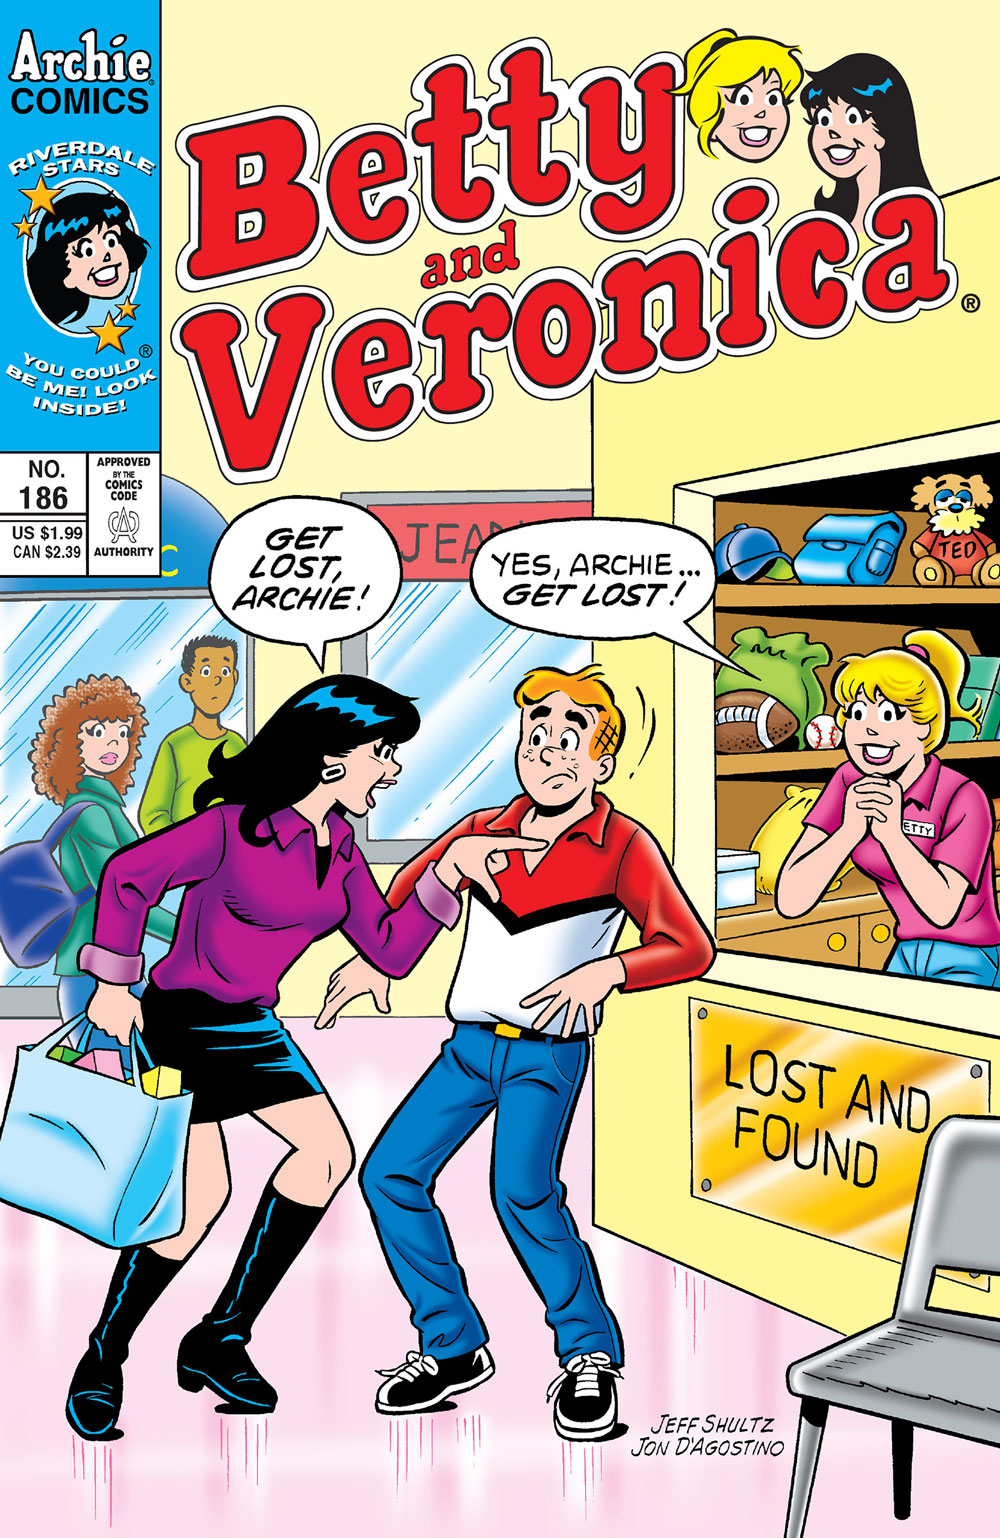 Veronica and Archie are shopping at the mall, and Betty is staffing the lost-and-found. Veronica looks angry, like they were just in a fight. She tells Archie to get lost. Betty looks excited and expectant with her hands clasped under her chin and says yes, she wants Archie to get lost, meaning he'll have to go with her to the lost-and-found.